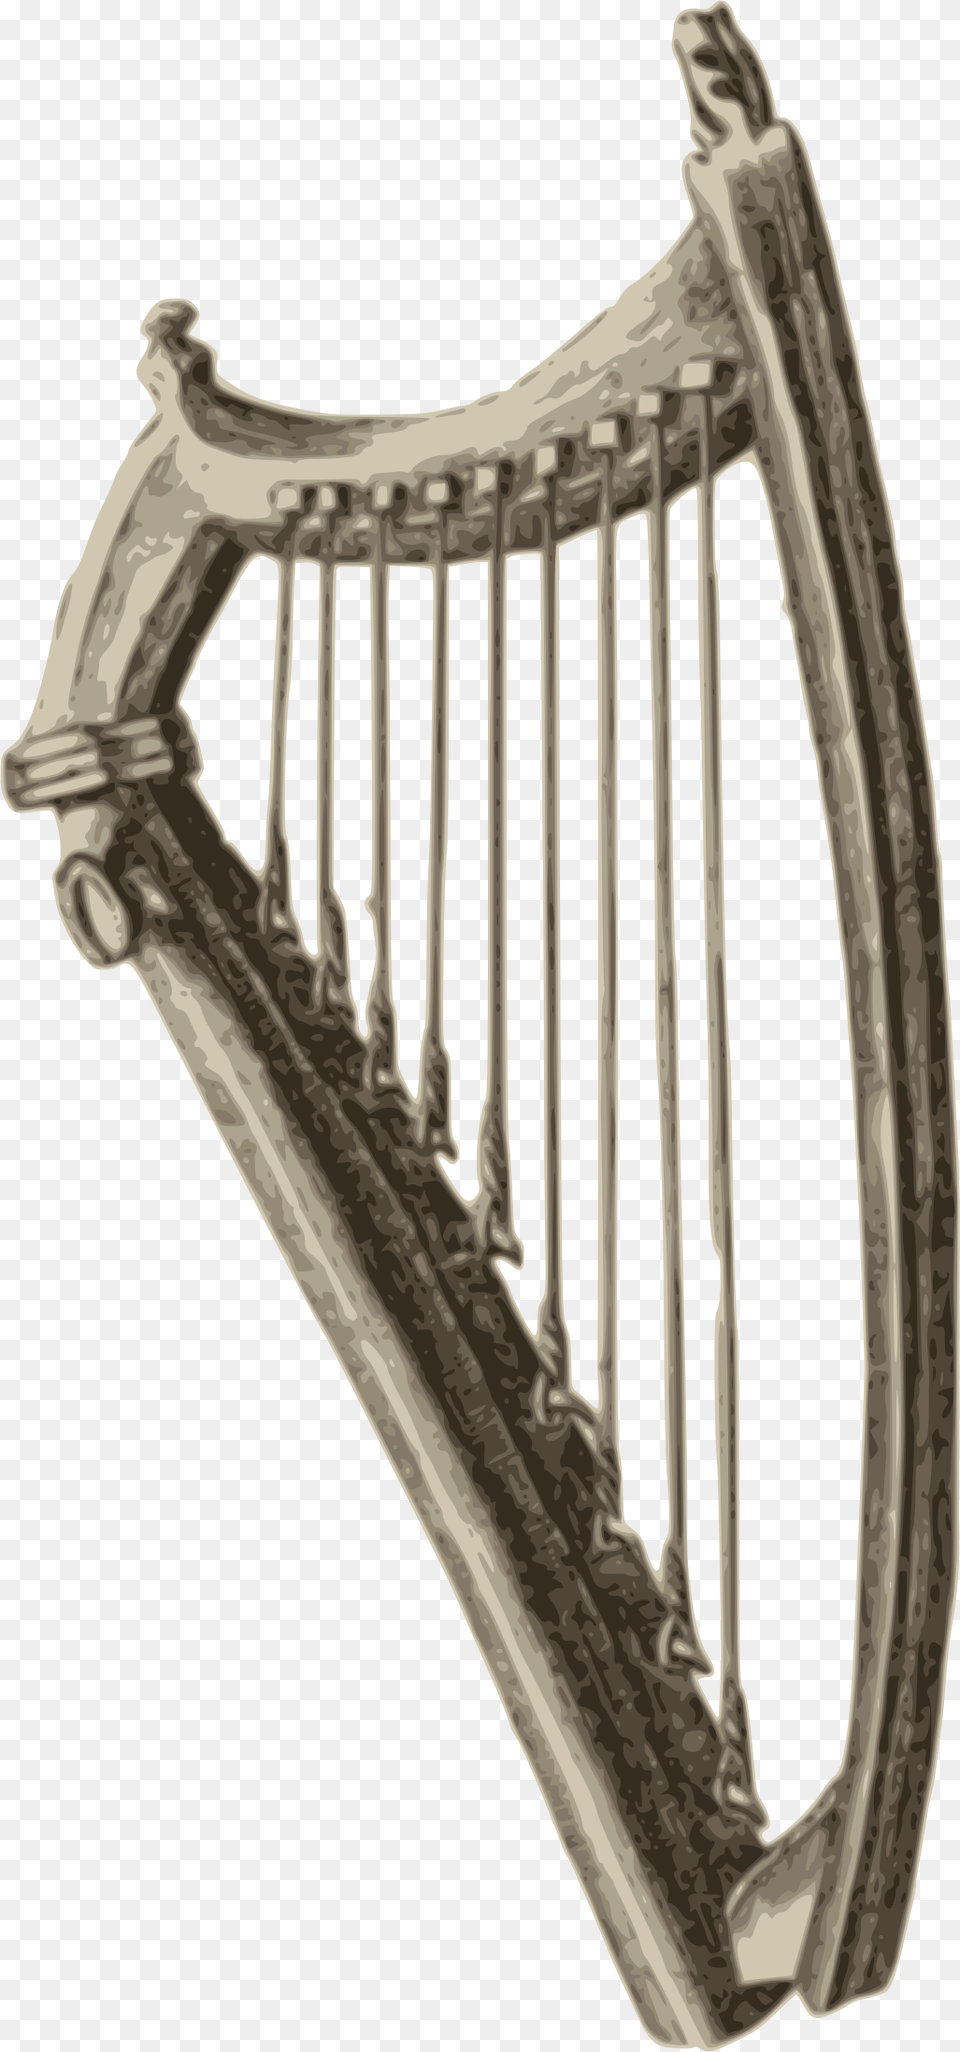 This Icons Design Of Telyn, Musical Instrument, Harp Free Png